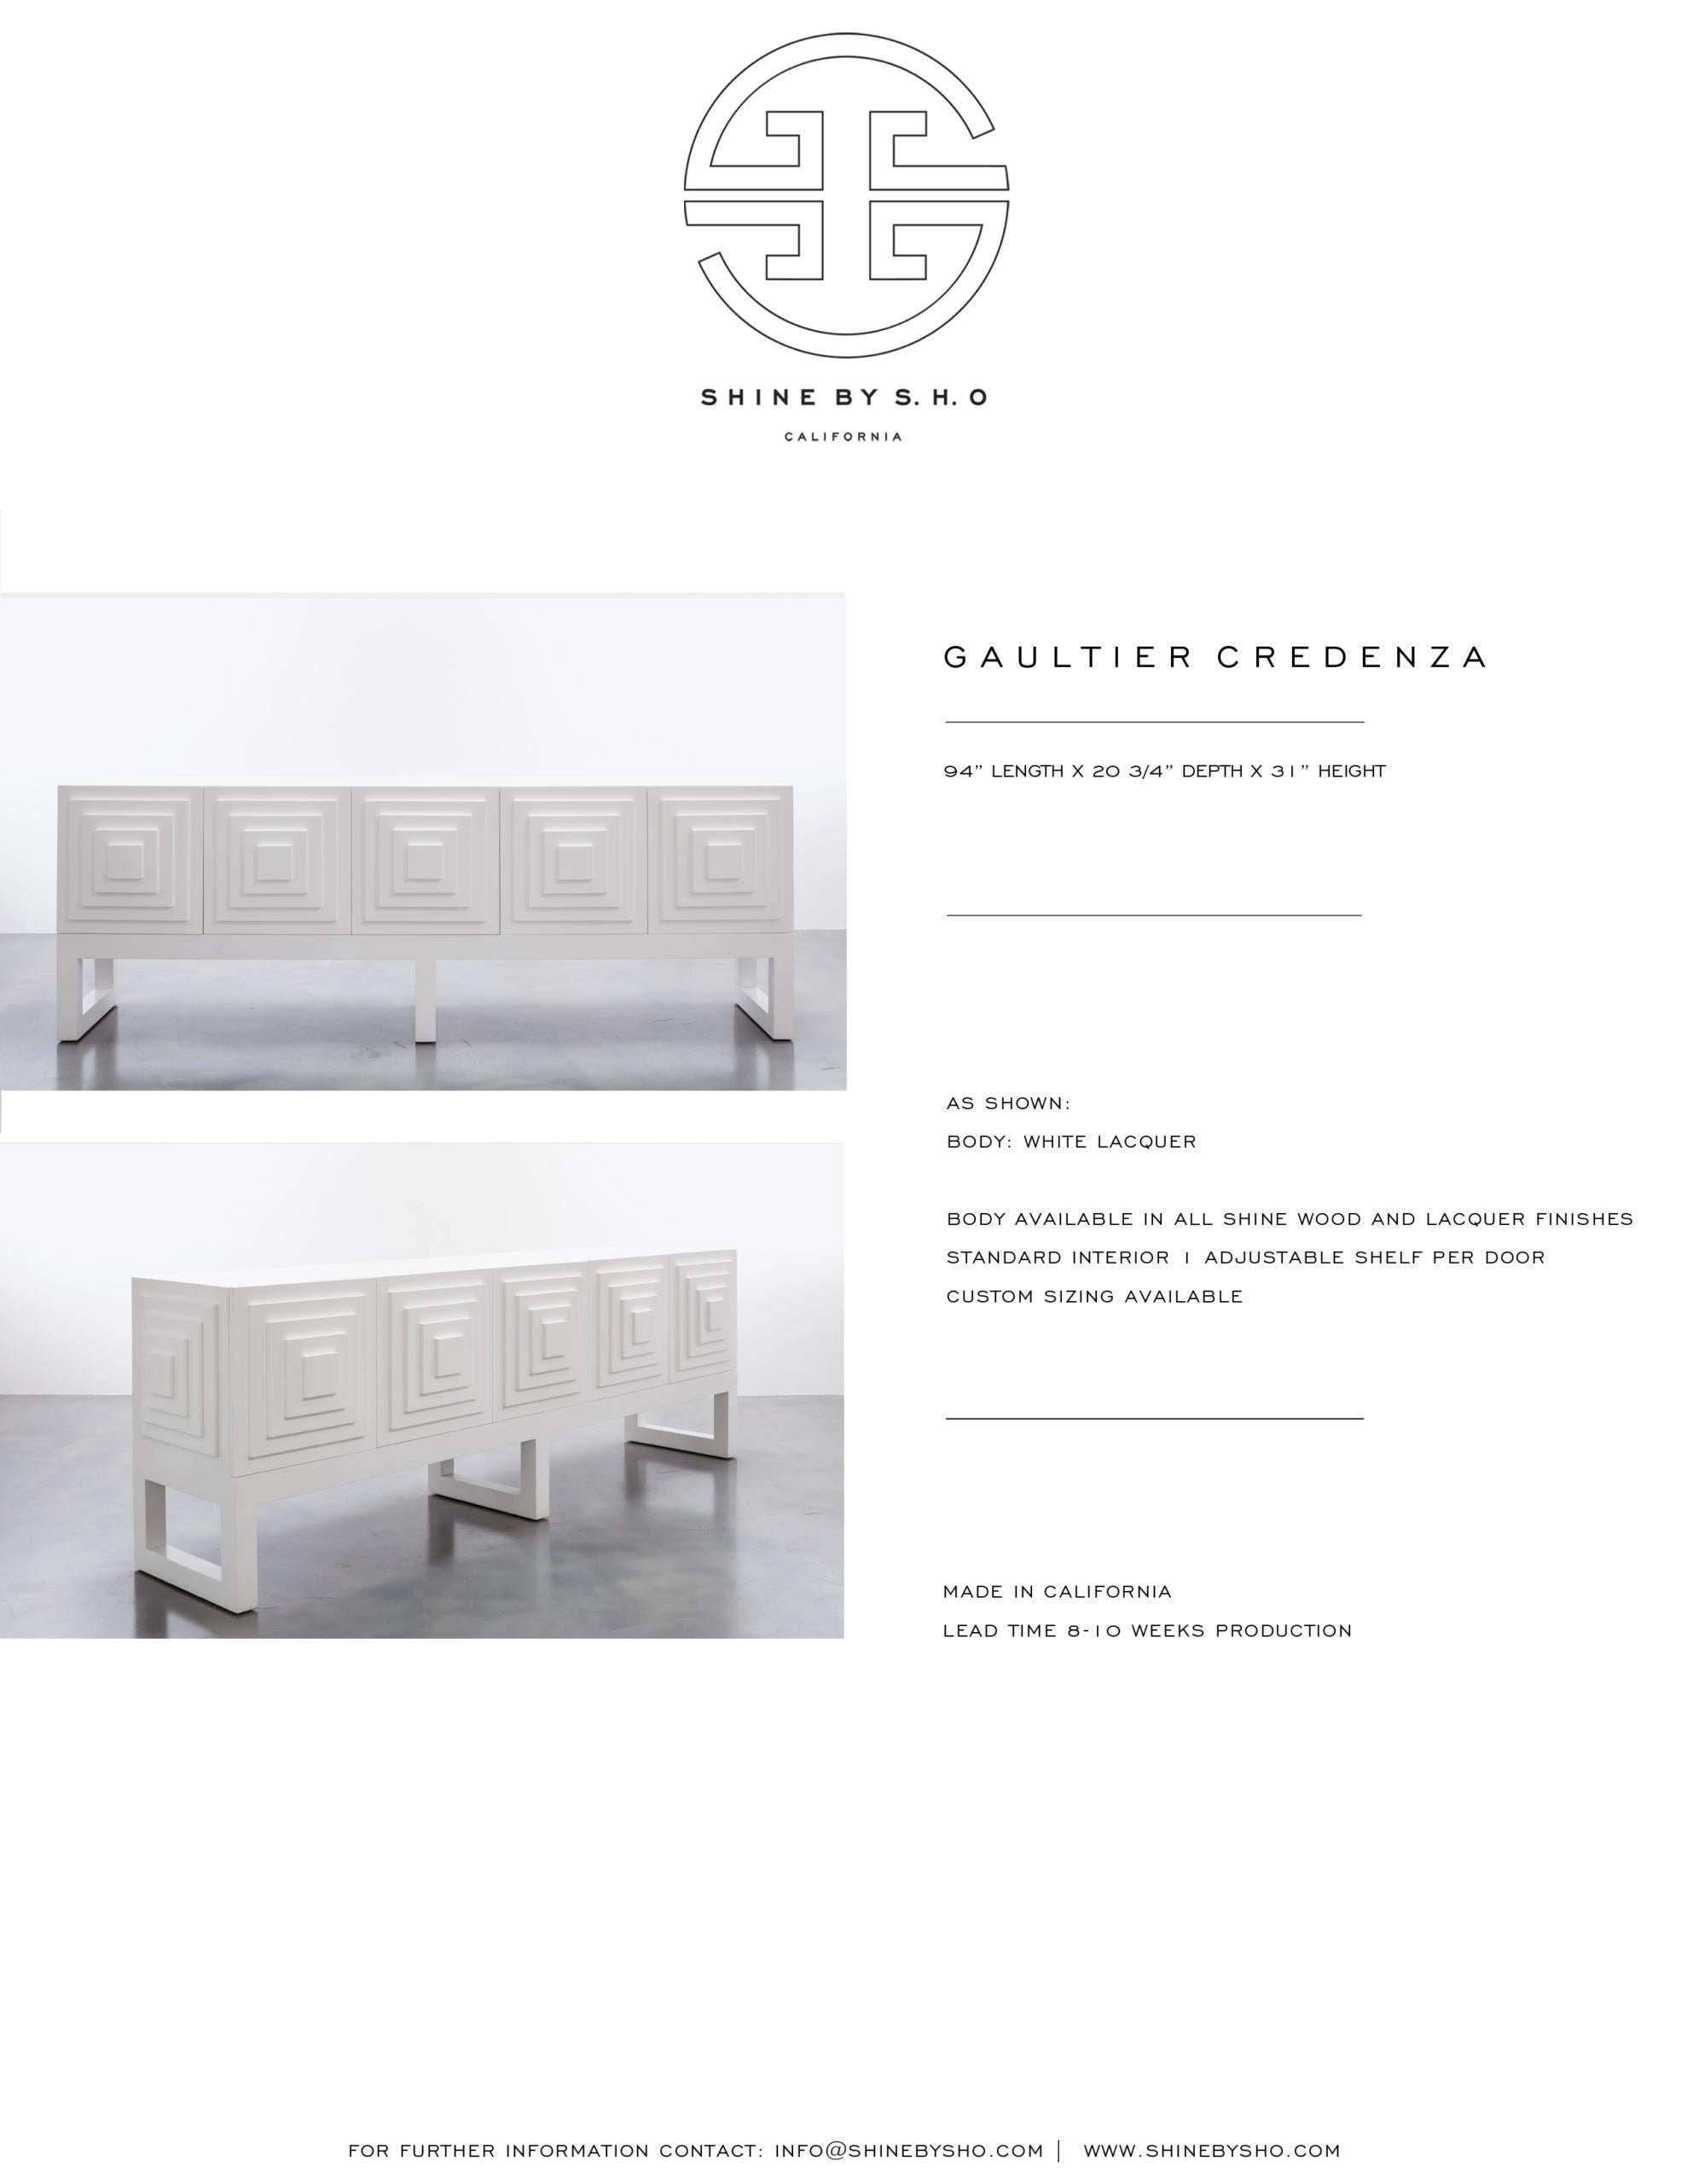 Contemporary GAULTIER CREDENZA - Modern geometric cabinet in white lacquer finish For Sale